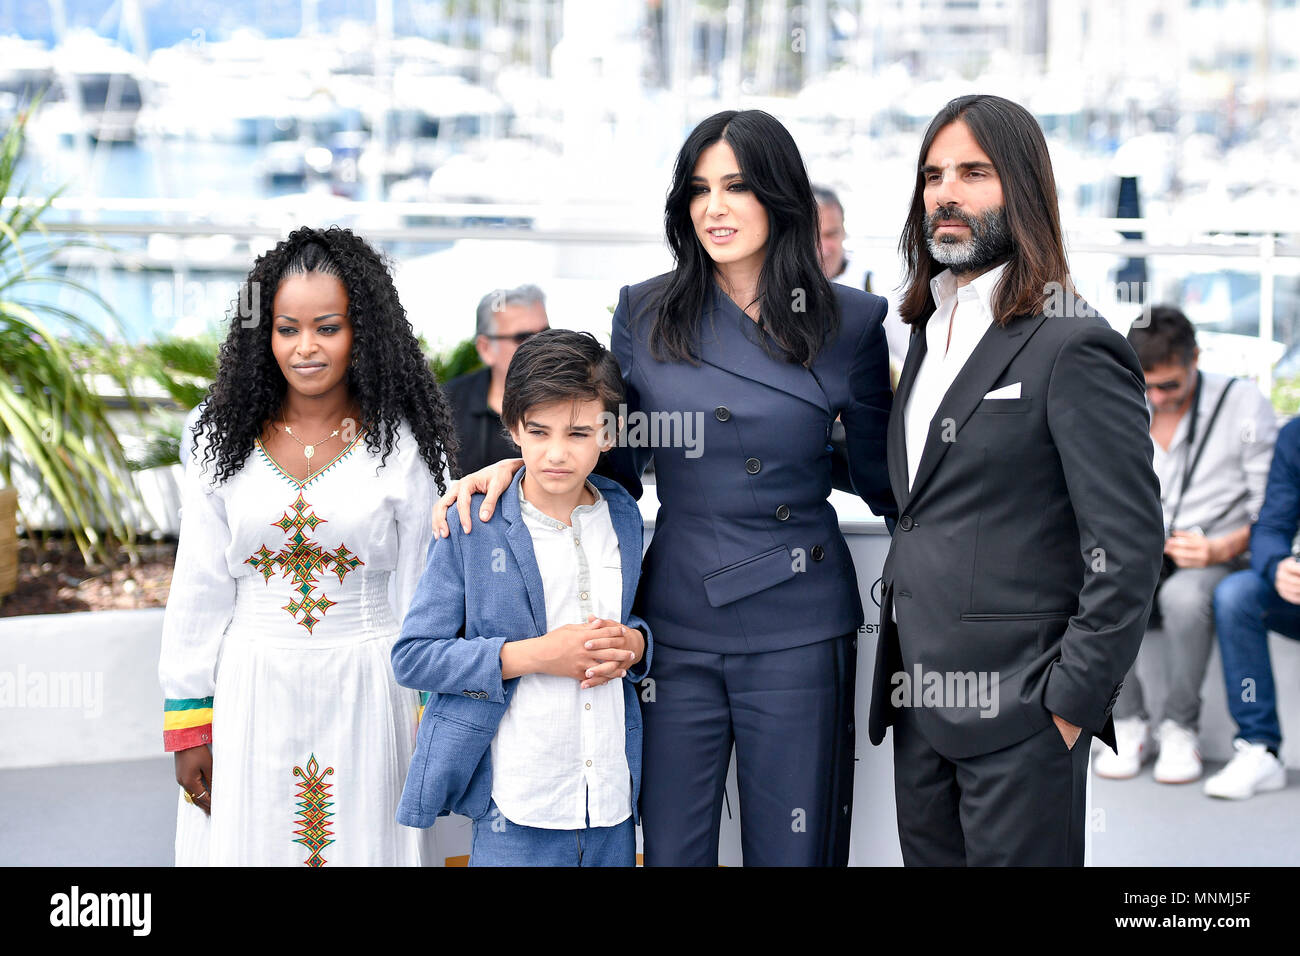 Cannes, Cannes International Film Festival in Cannes. 18th May, 2018. Actress Yordanos Shiferaw, actor Zain Al Rafeea, director Nadine Labaki and actor Khaled Mouzanar (L to R) of the Lebanese film 'Capernaum', pose during a photocall of the 71st Cannes International Film Festival in Cannes, France on May 18, 2018. The 71st Cannes International Film Festival is held from May 8 to May 19. Credit: Chen Yichen/Xinhua/Alamy Live News Stock Photo